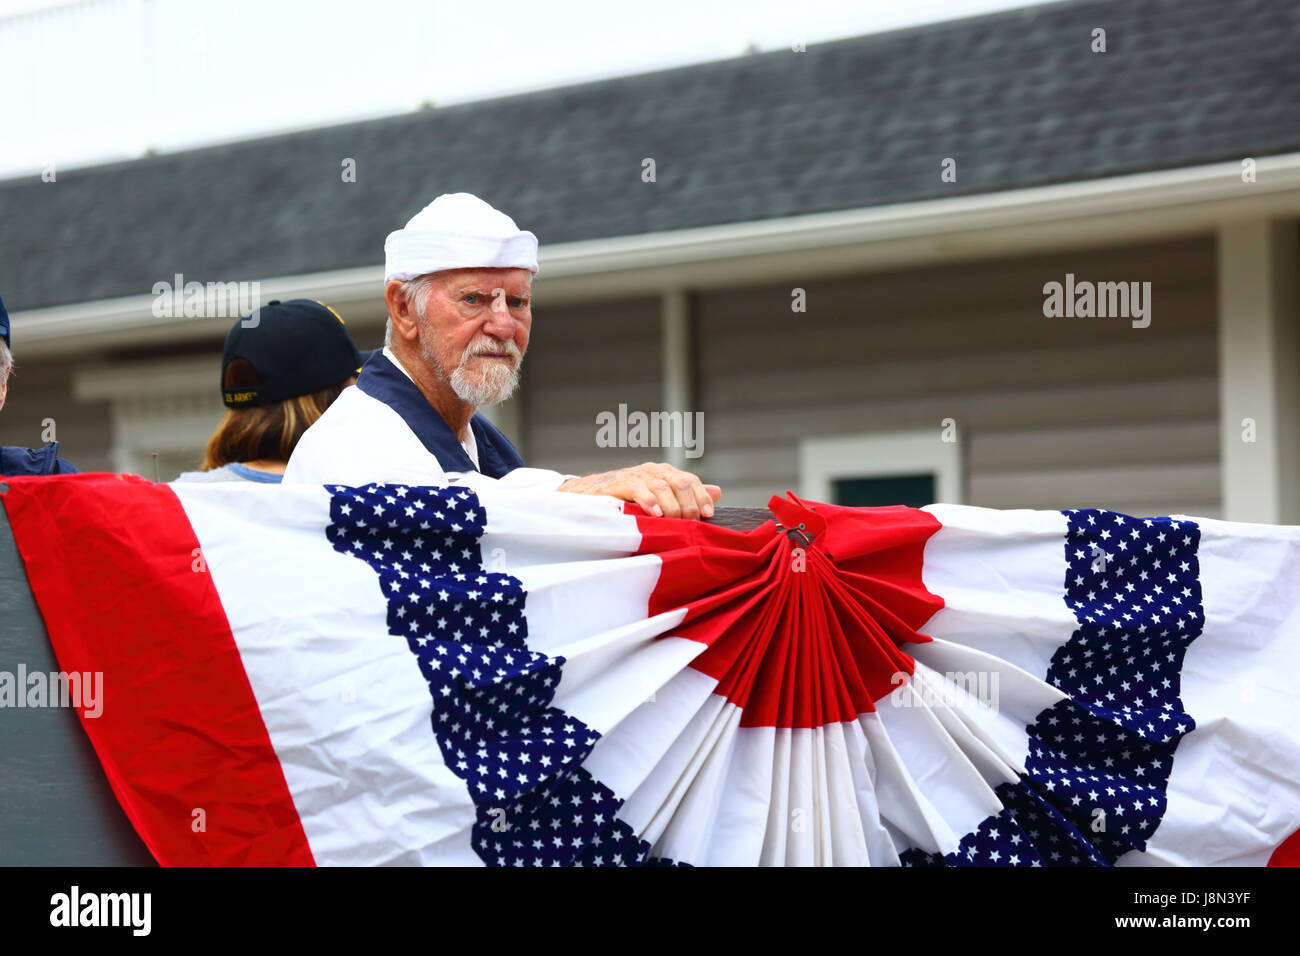 Westminster, Maryland, USA. 29th May, 2017. A navy veteran takes part in parades for Memorial Day, a federal holiday in the United States for remembering those who died while serving in the country's armed forces. Credit: James Brunker/Alamy Live News Stock Photo